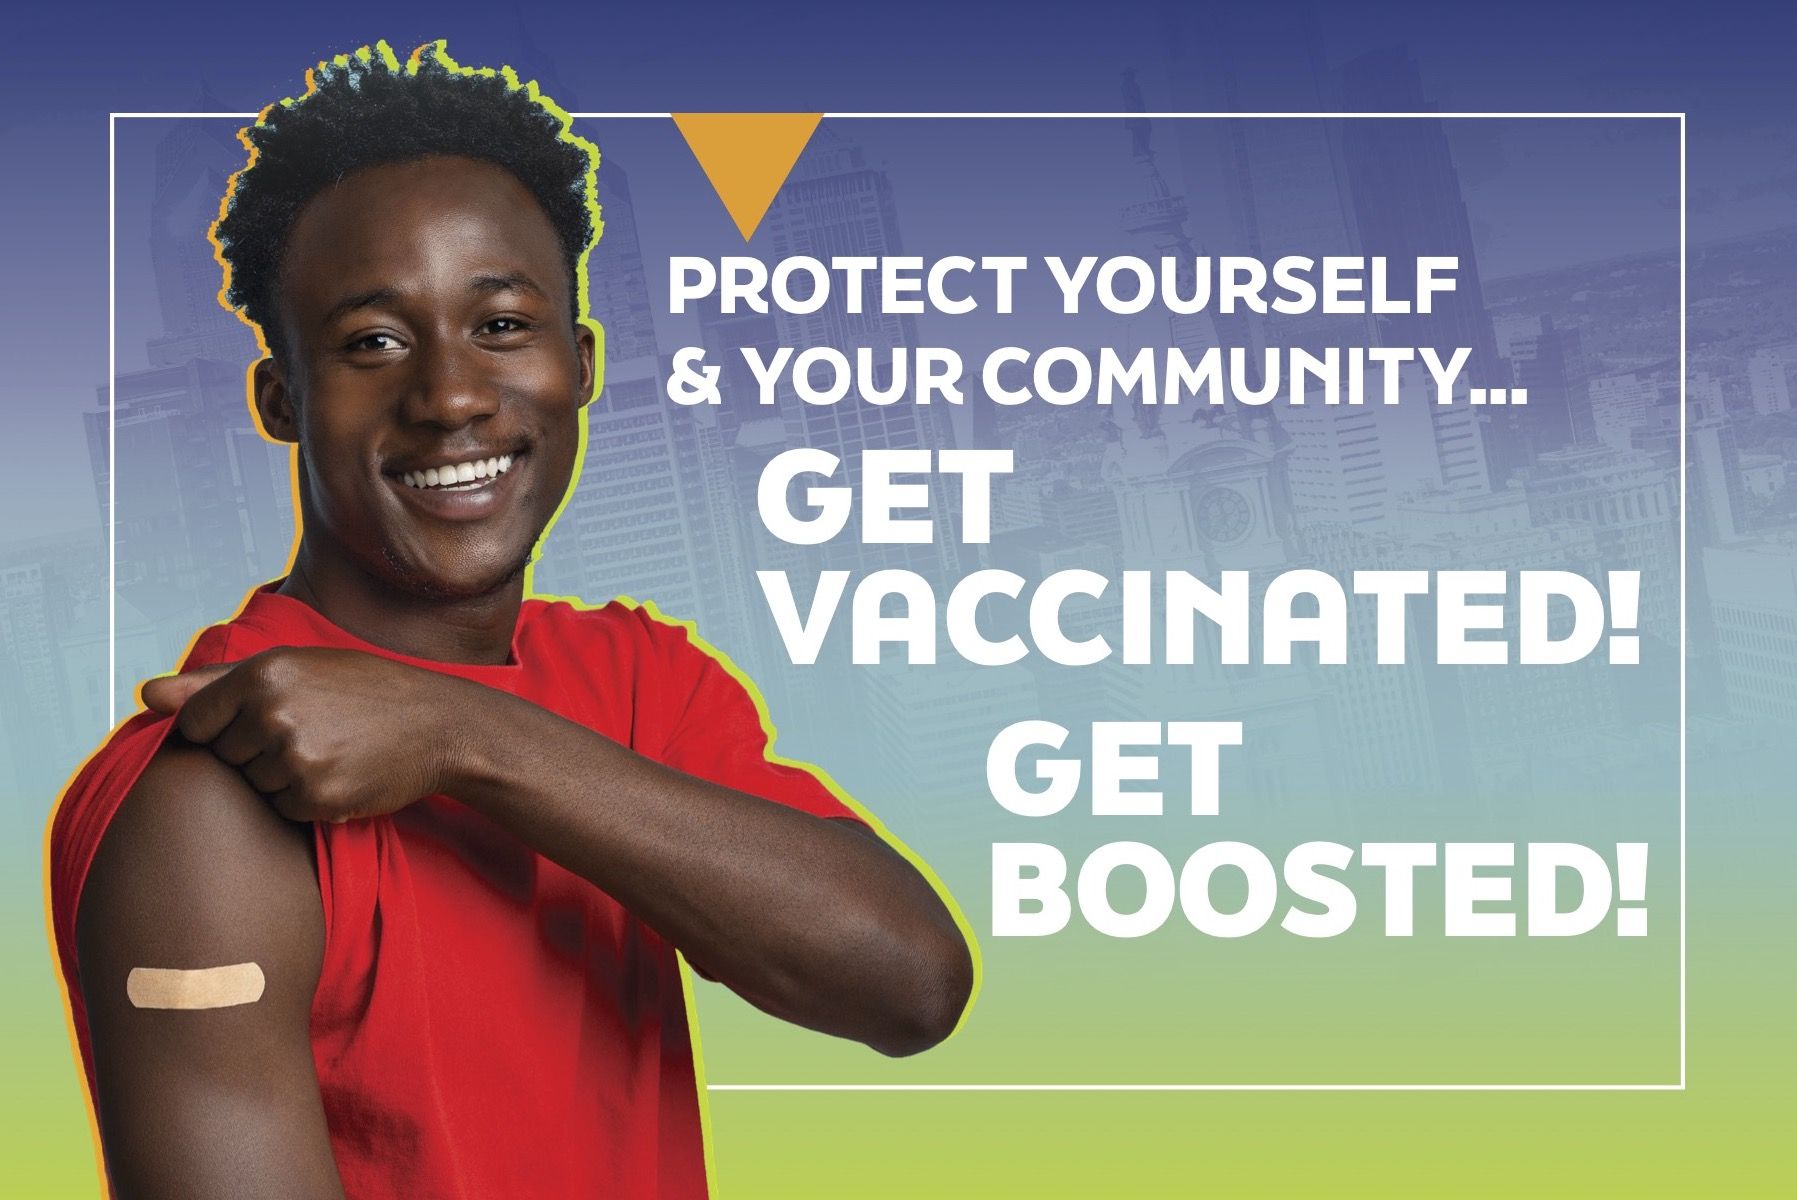 Get Vaccinated. Get Boosted